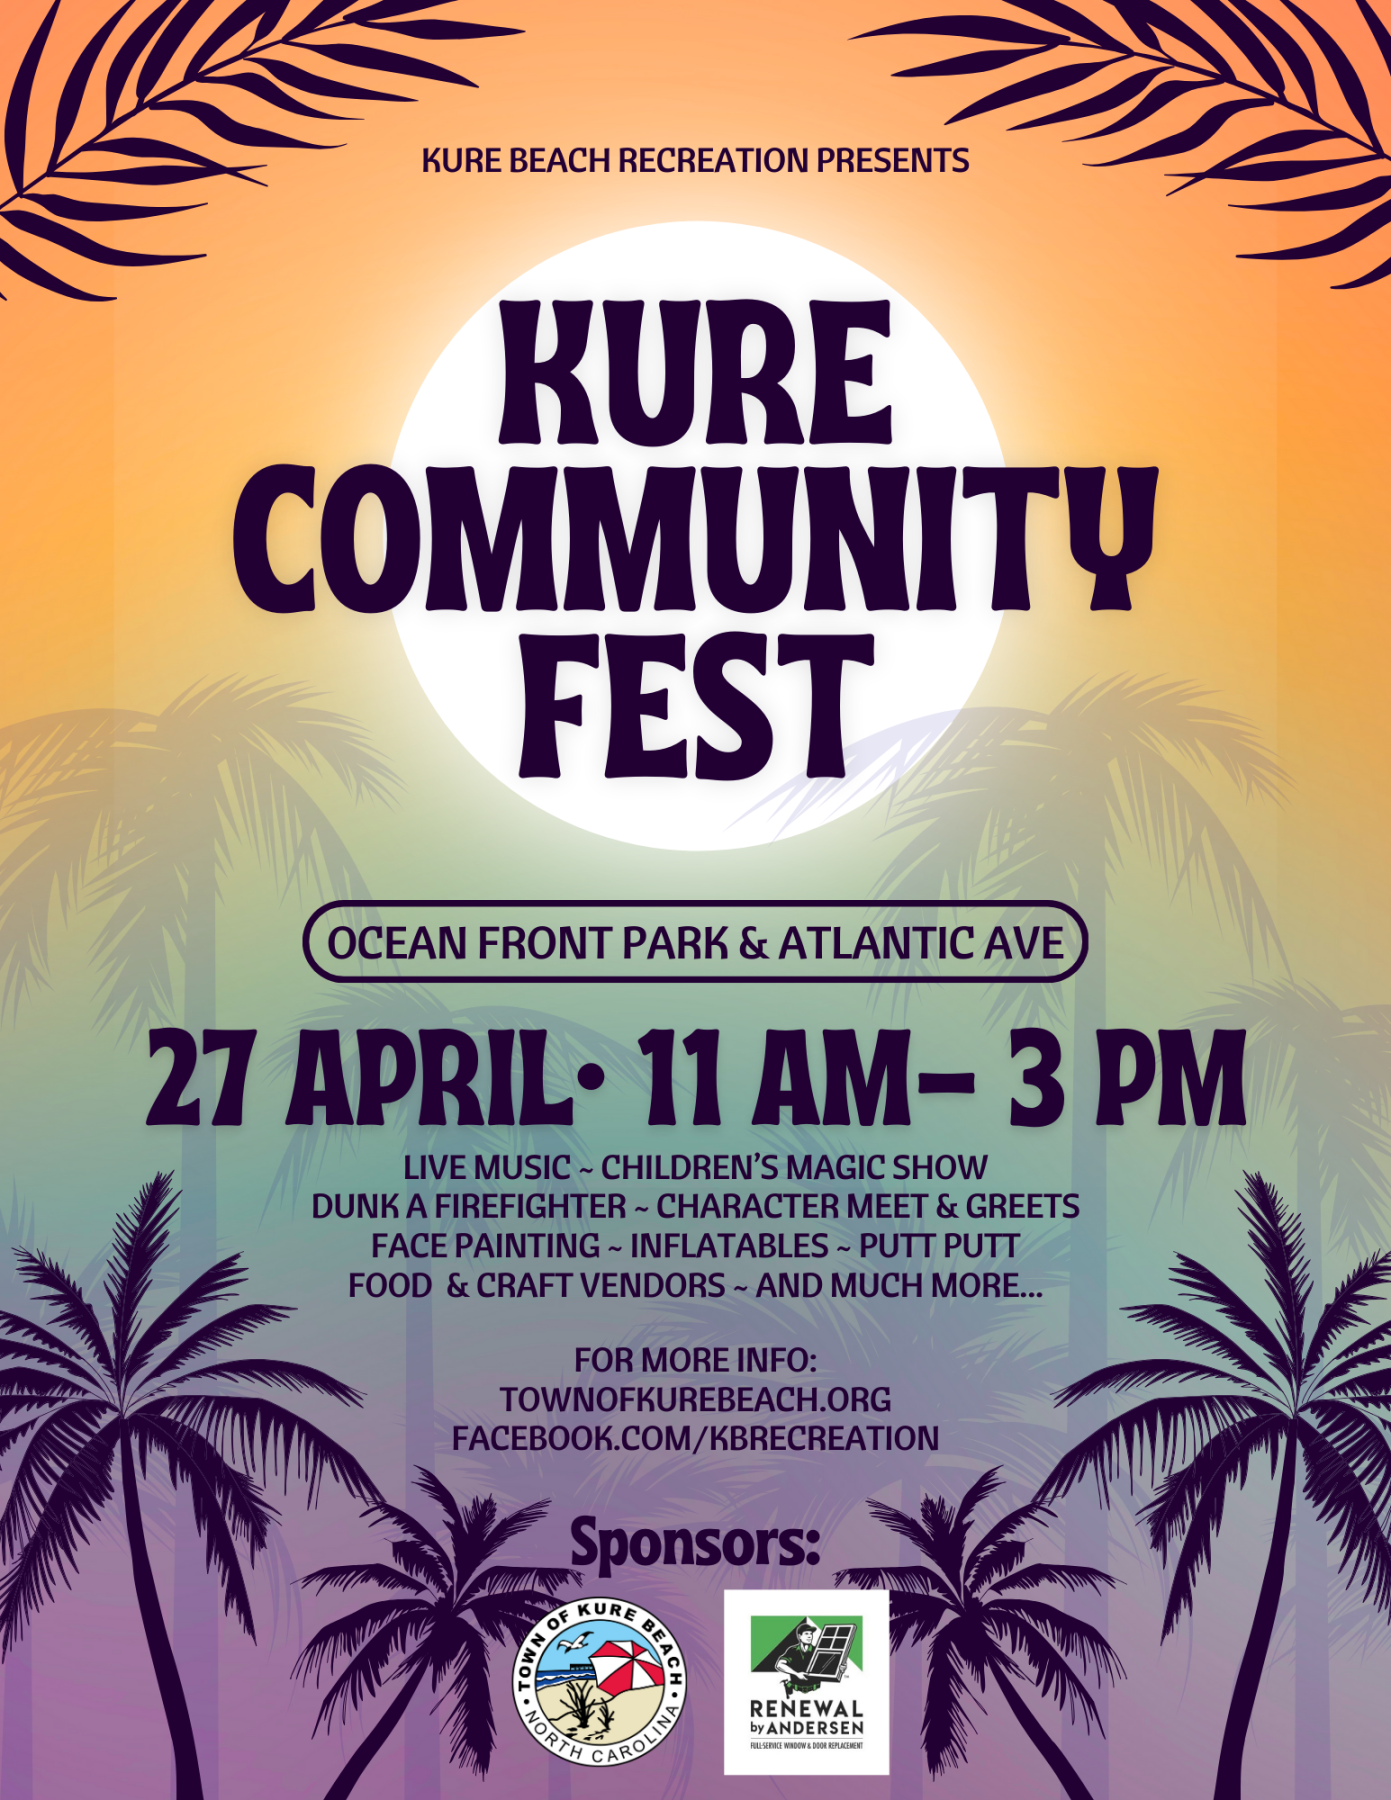 Kure Community Fest event details over colorful background with palm trees and sun images